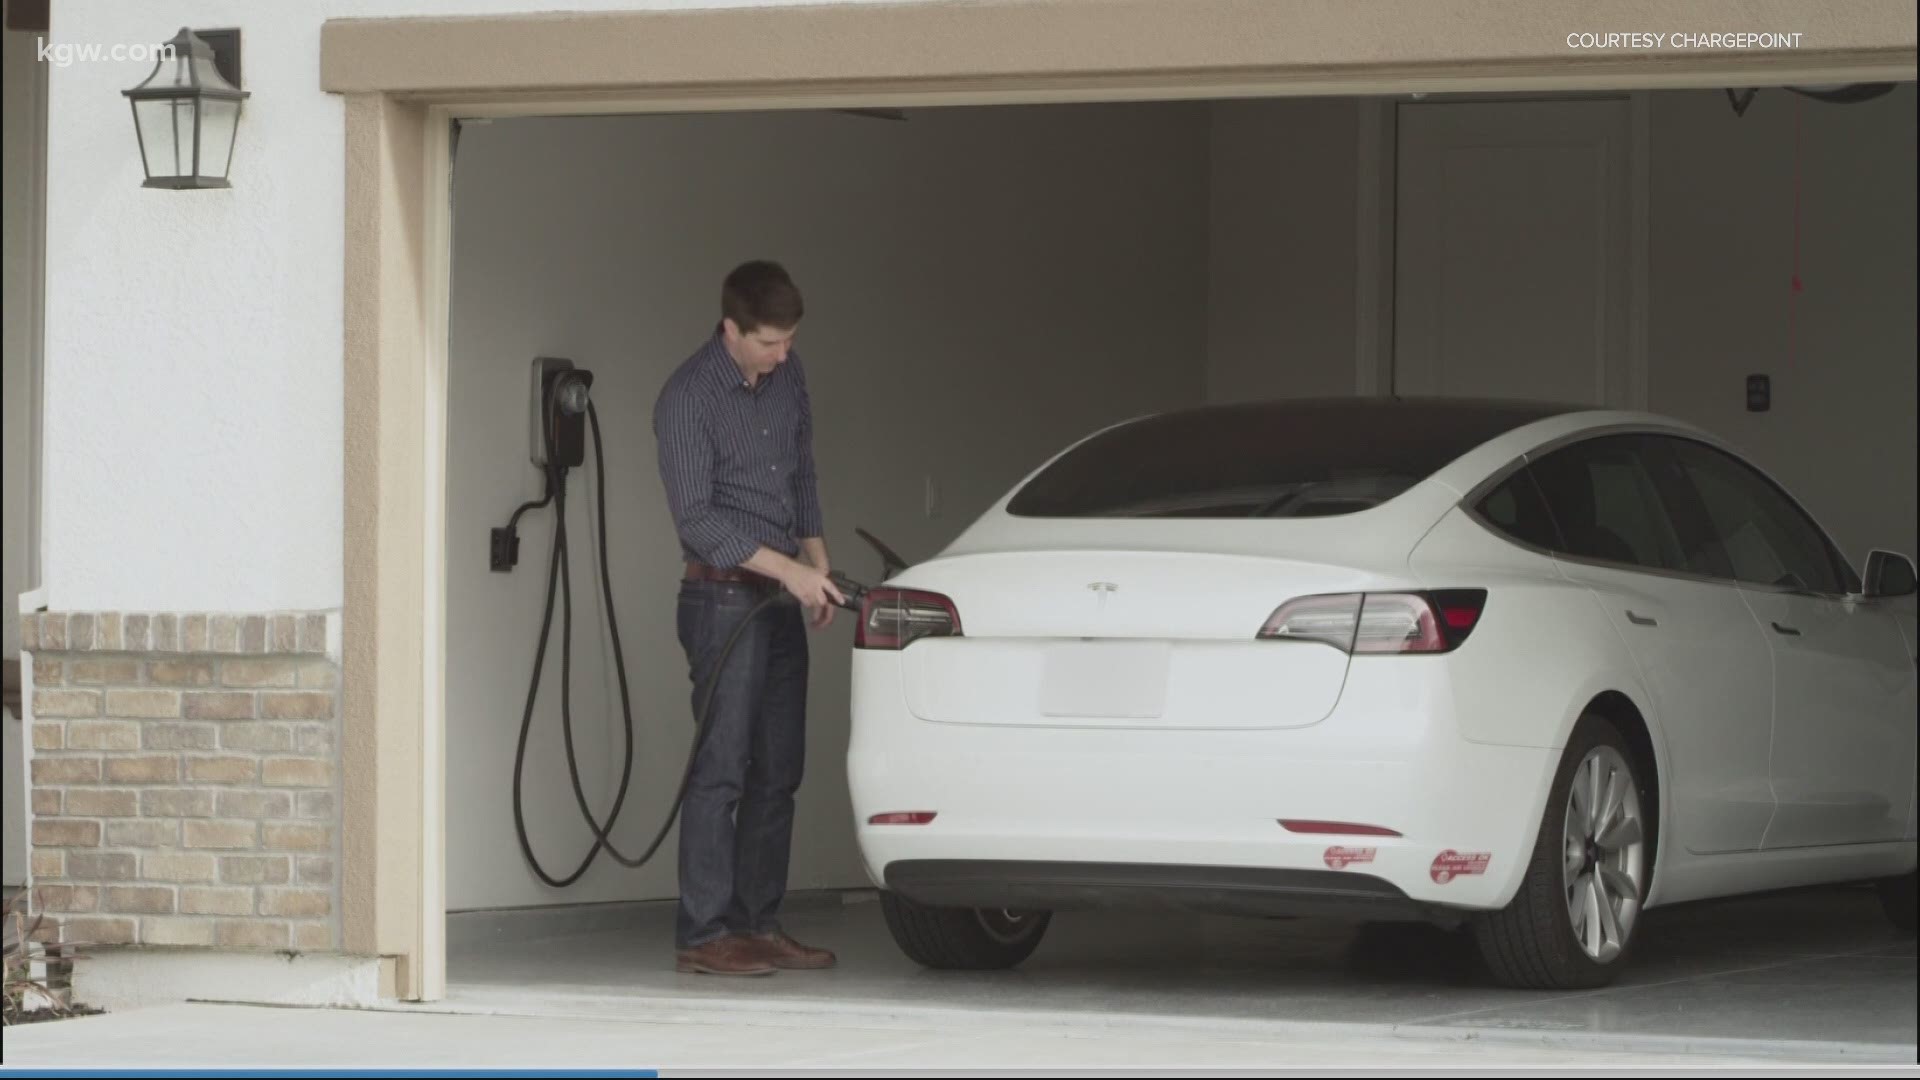 pge-offers-500-rebate-for-electric-vehicle-chargers-kgw